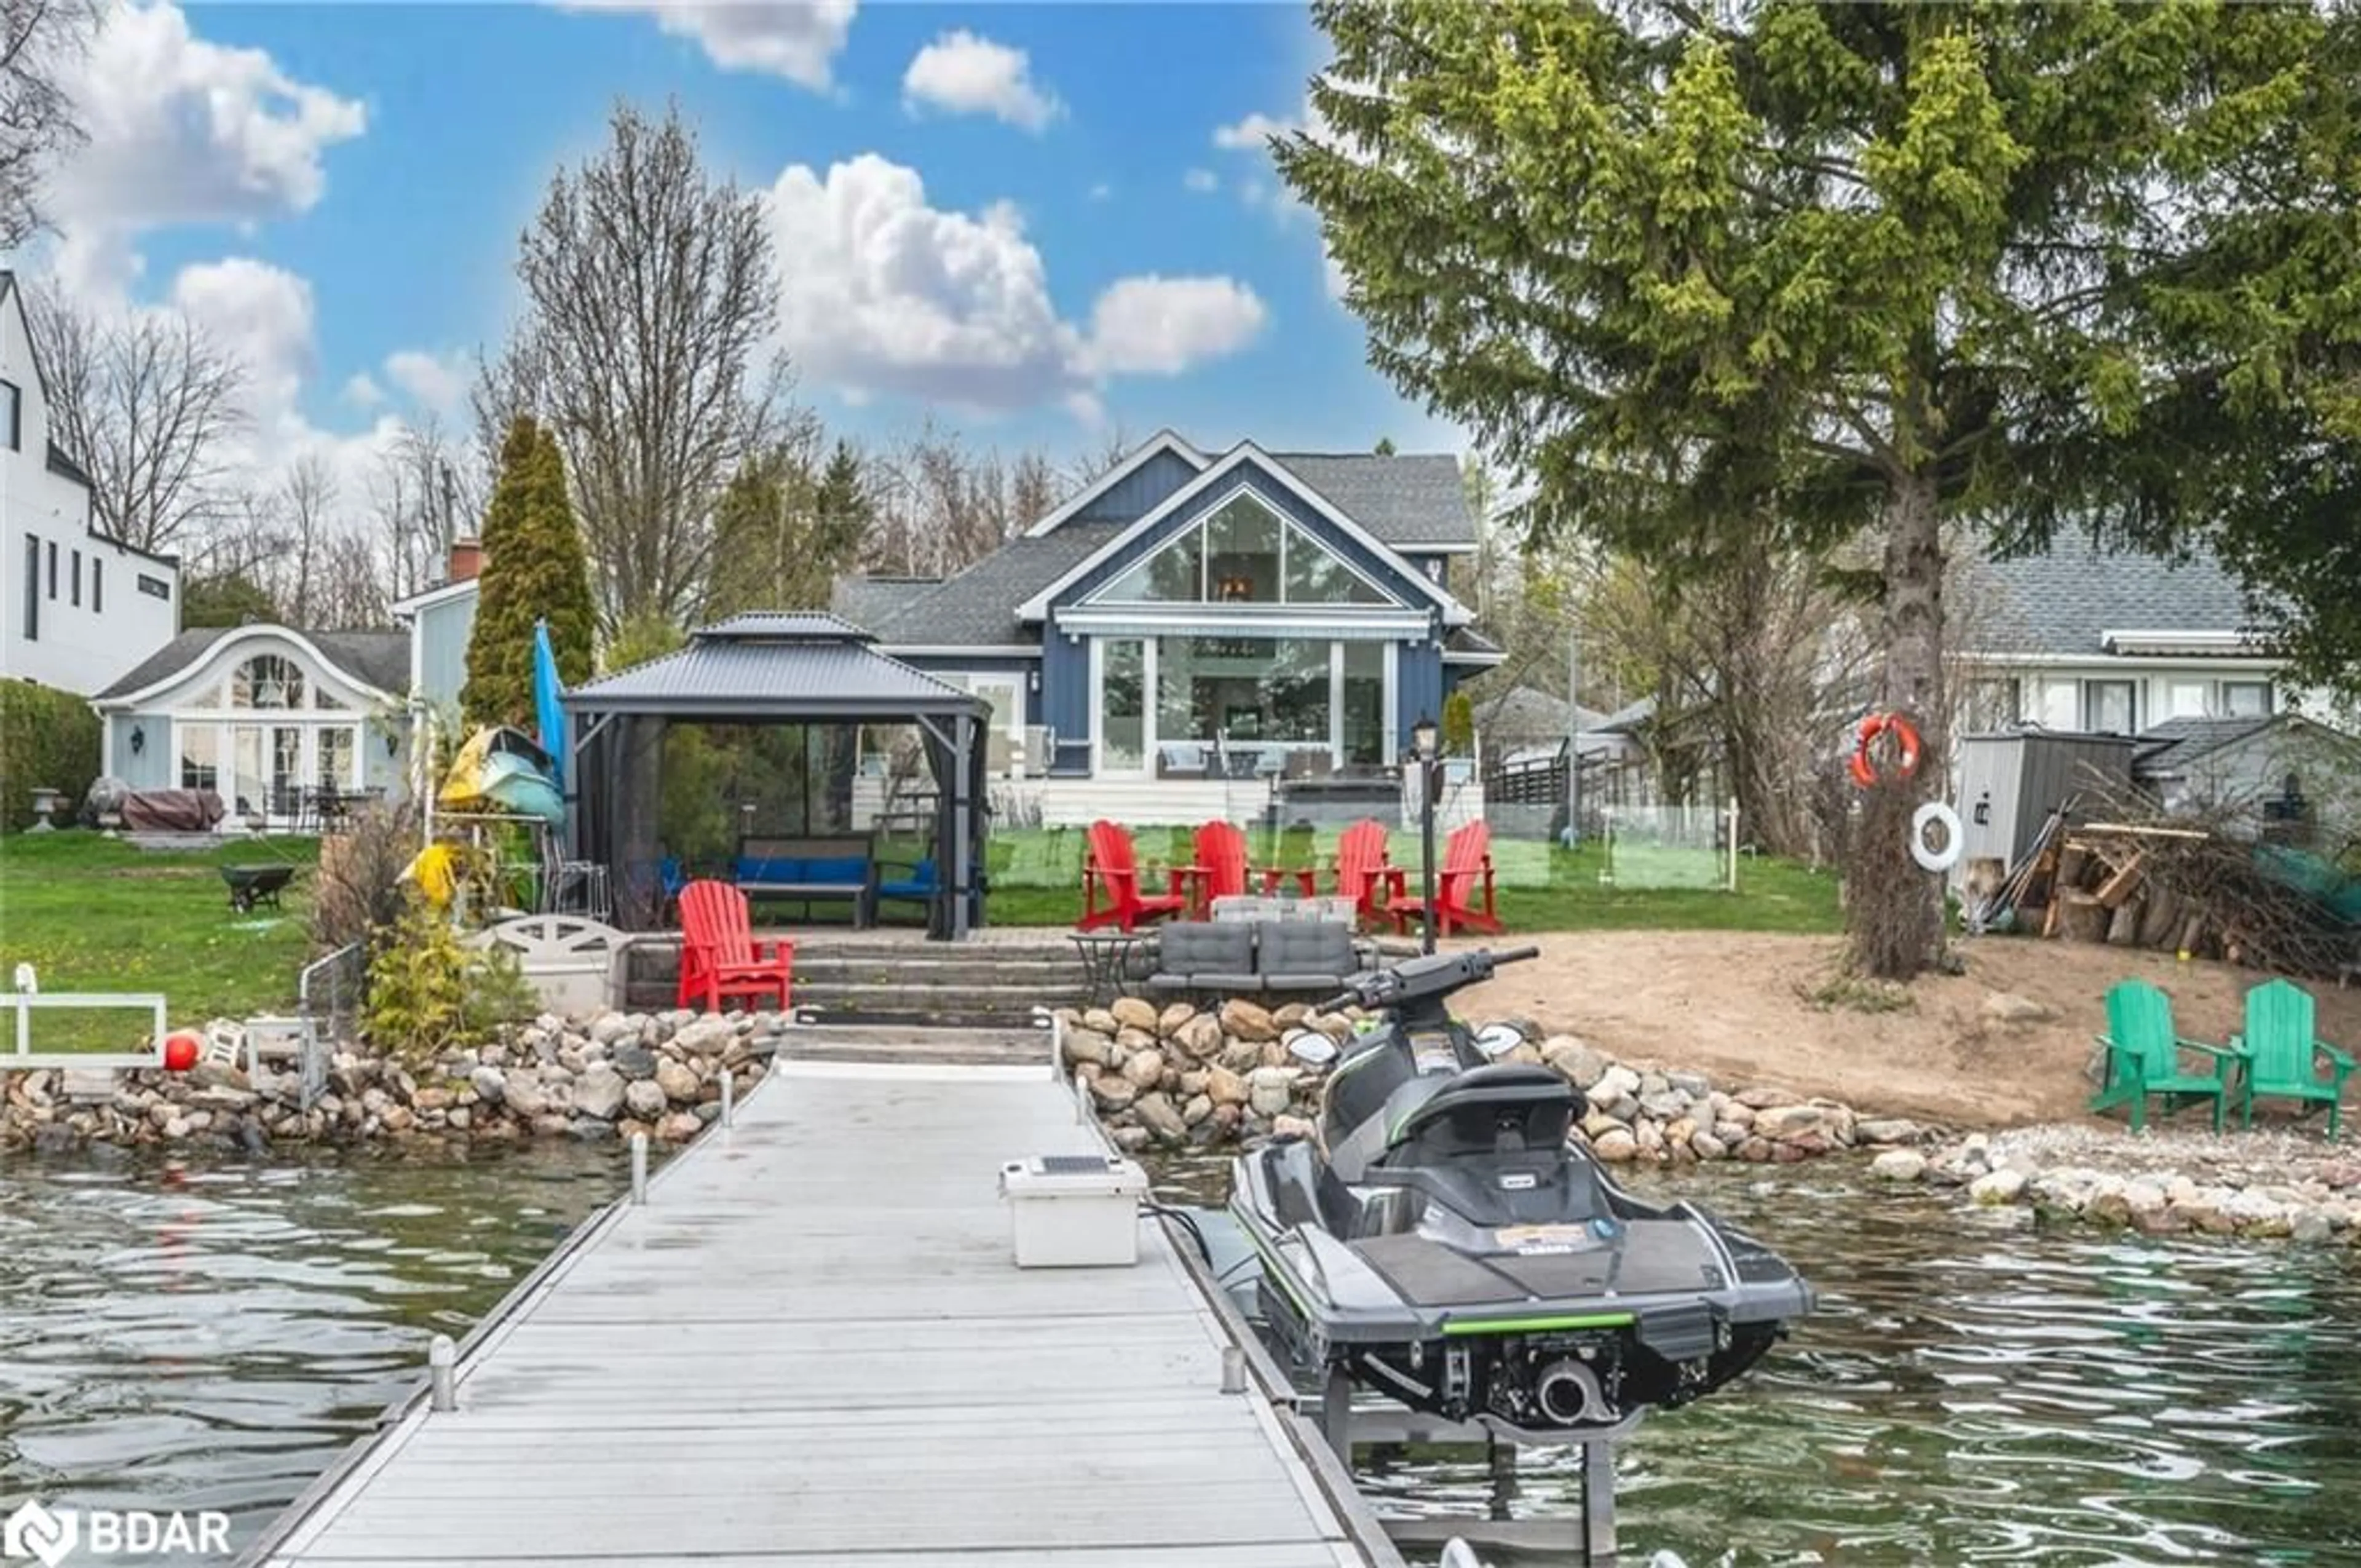 Cottage for 1627 Houston Ave, Innisfil Ontario L9S 4M6